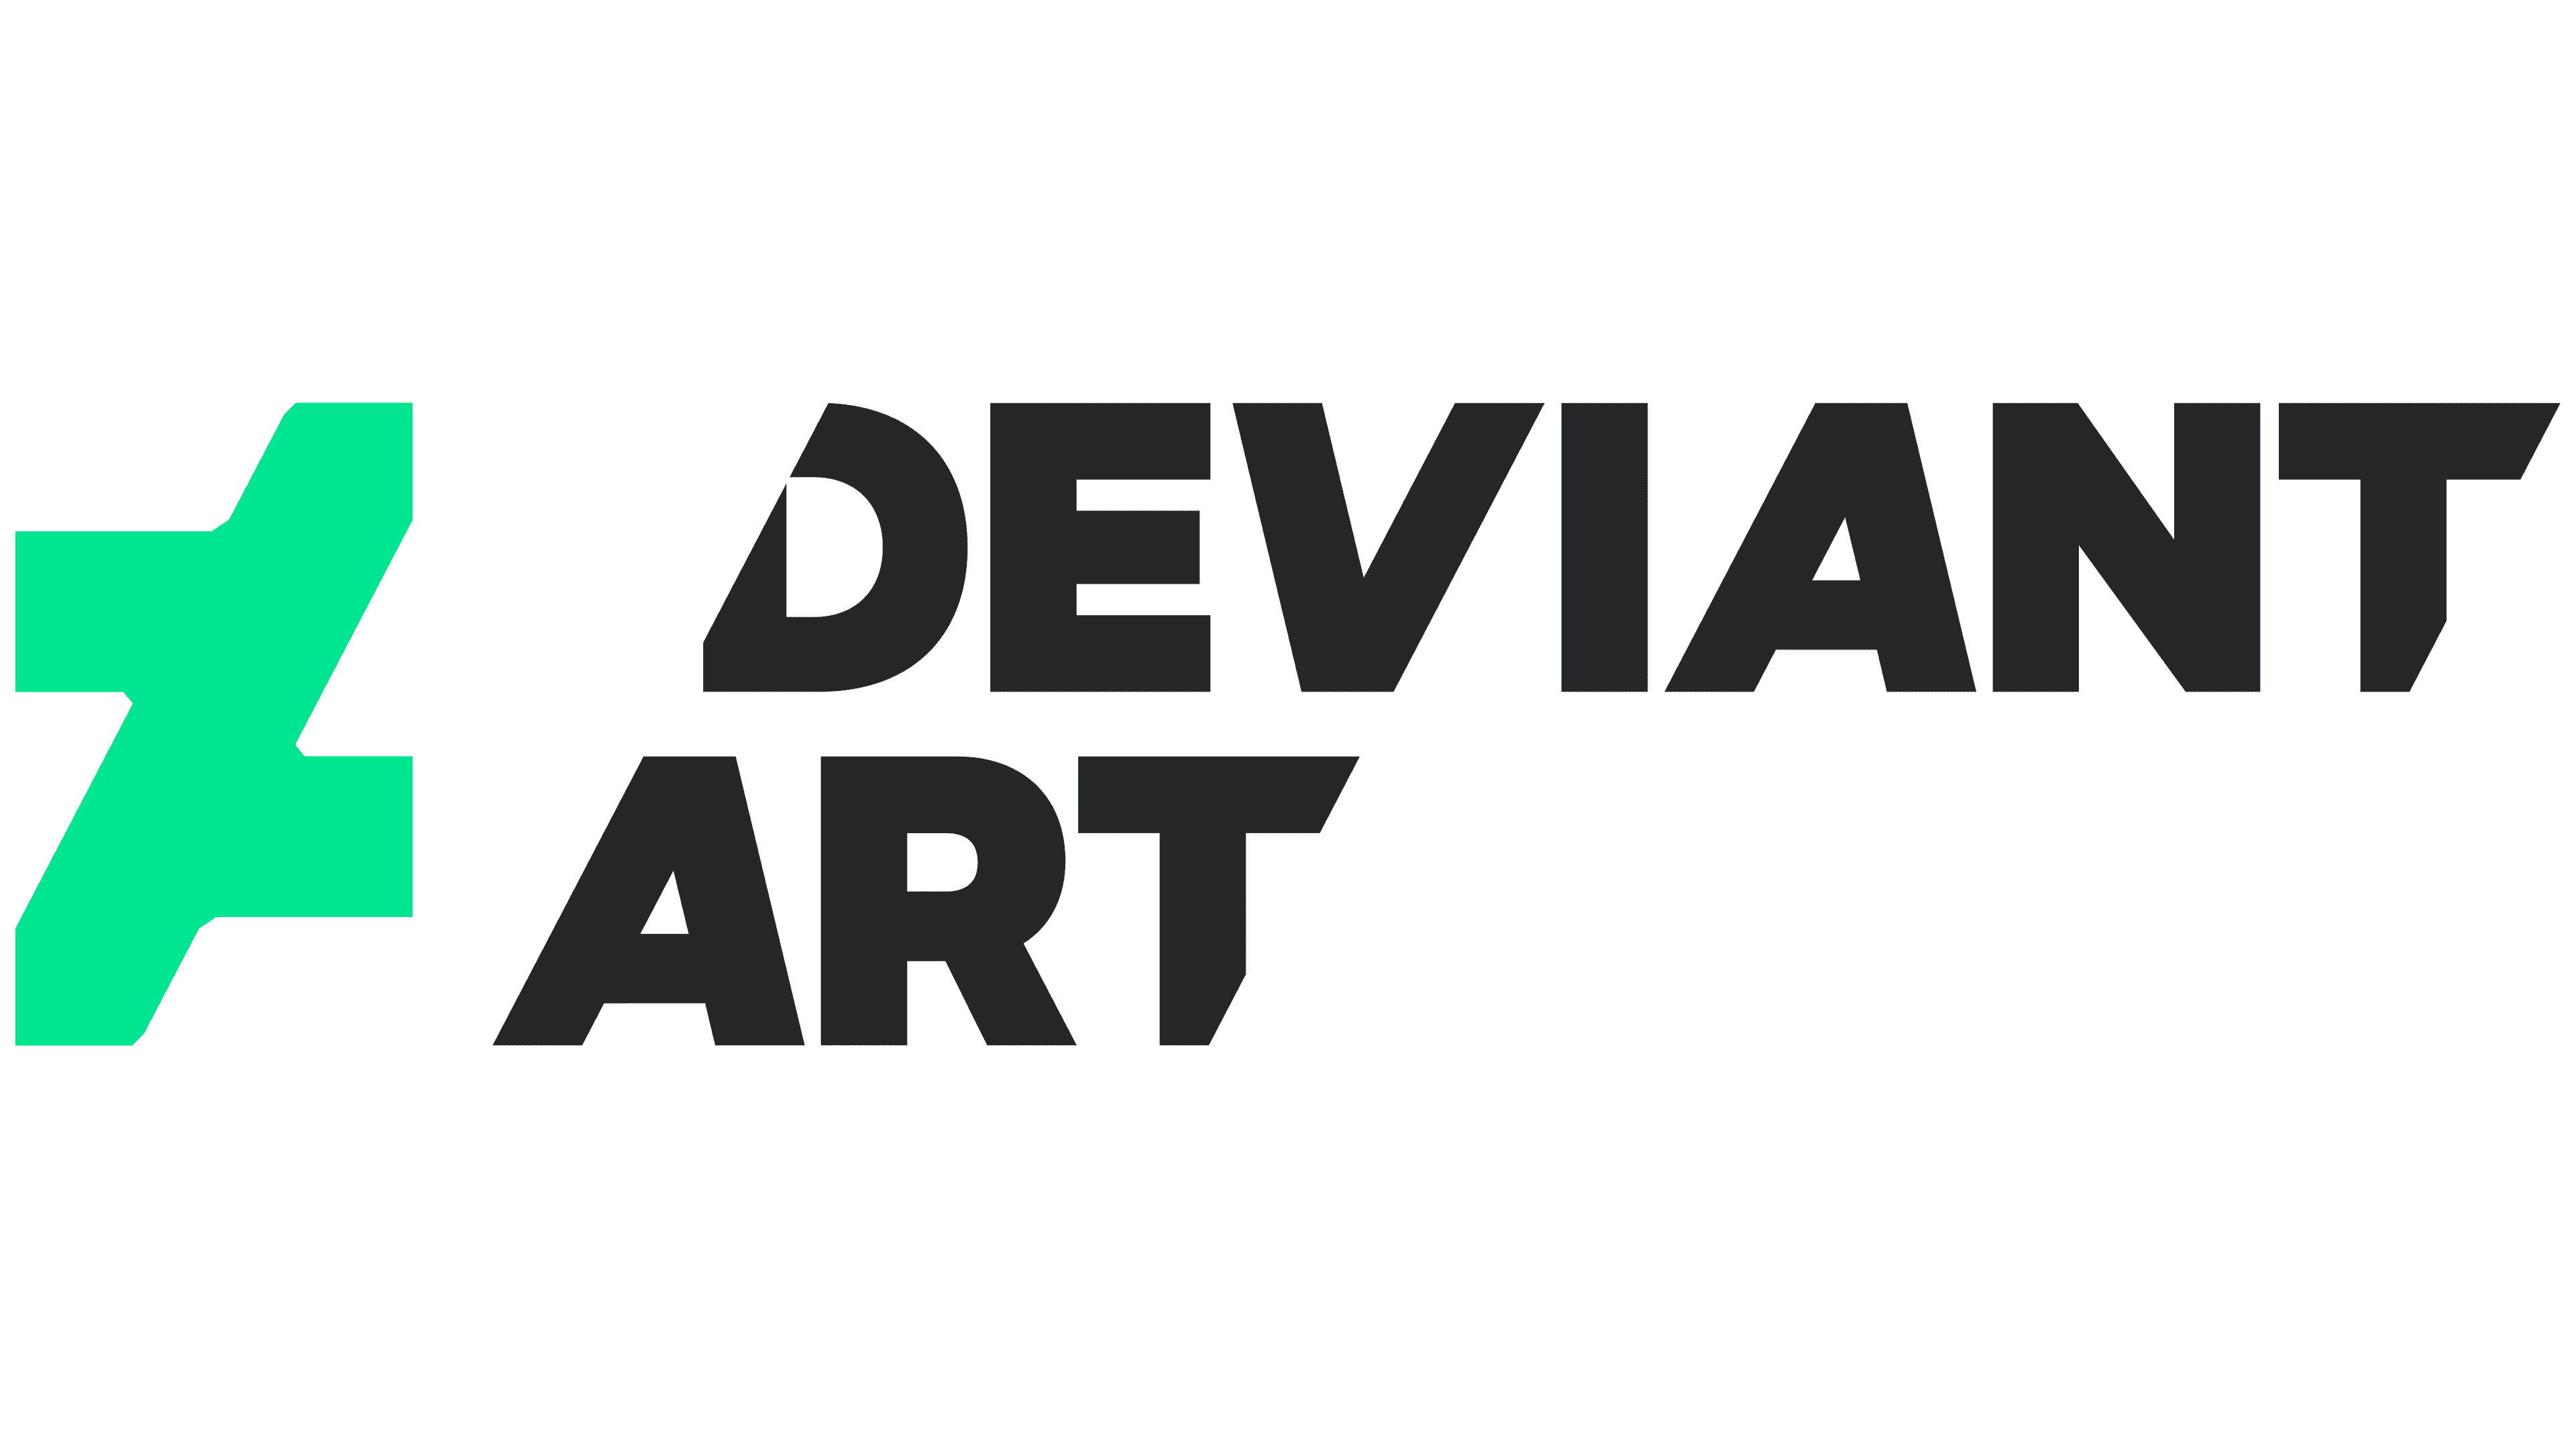 Deviantart Logo The Most Famous Brands And Company Logos In The World